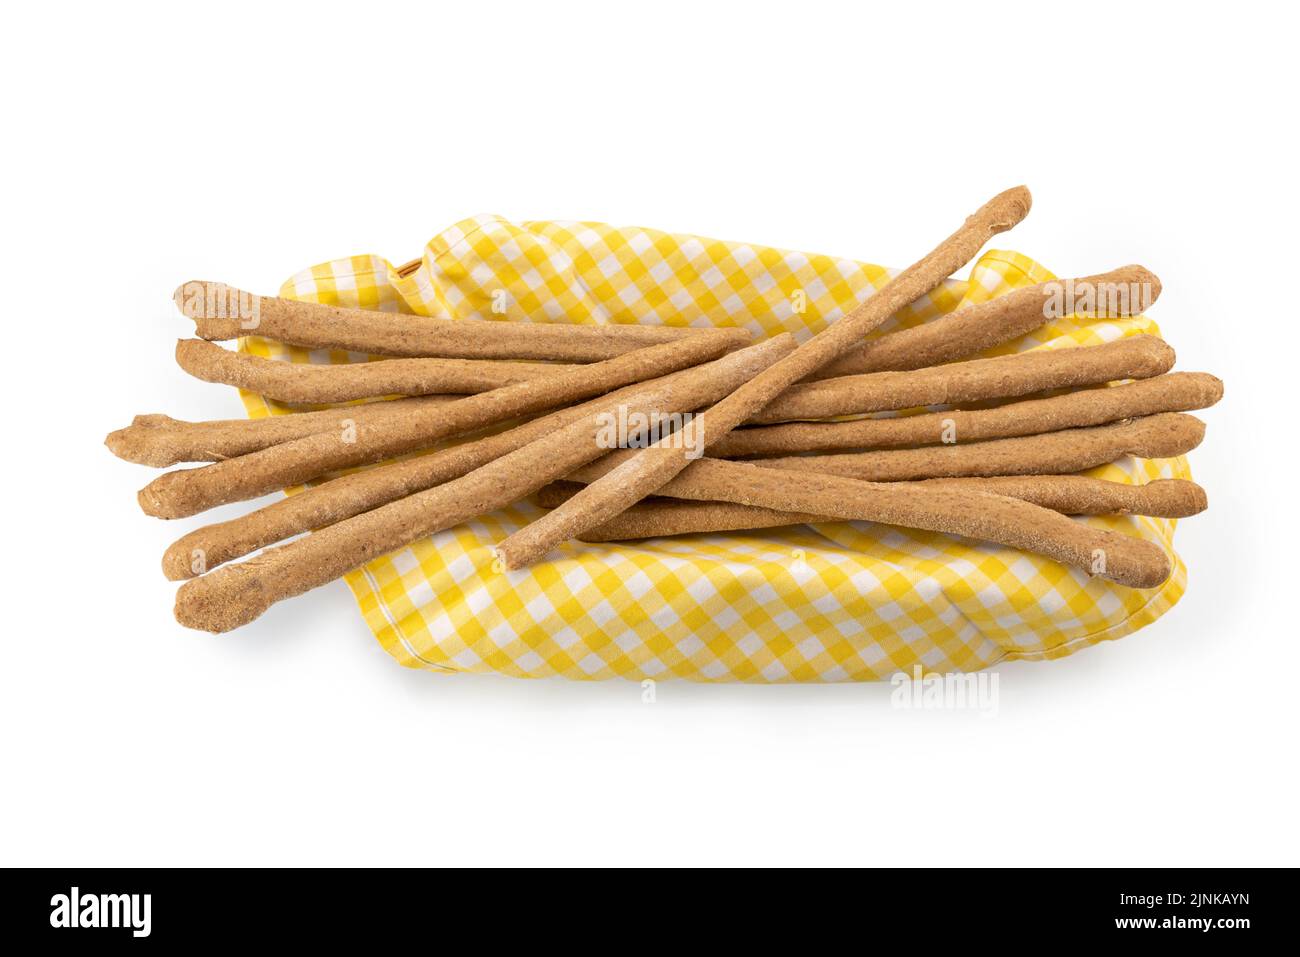 Breadsticks hand stretched (stirati a mano, in italian) on napkin yellow and white checkered, typical crunchy Turin baked breadsticks made of wholemea Stock Photo